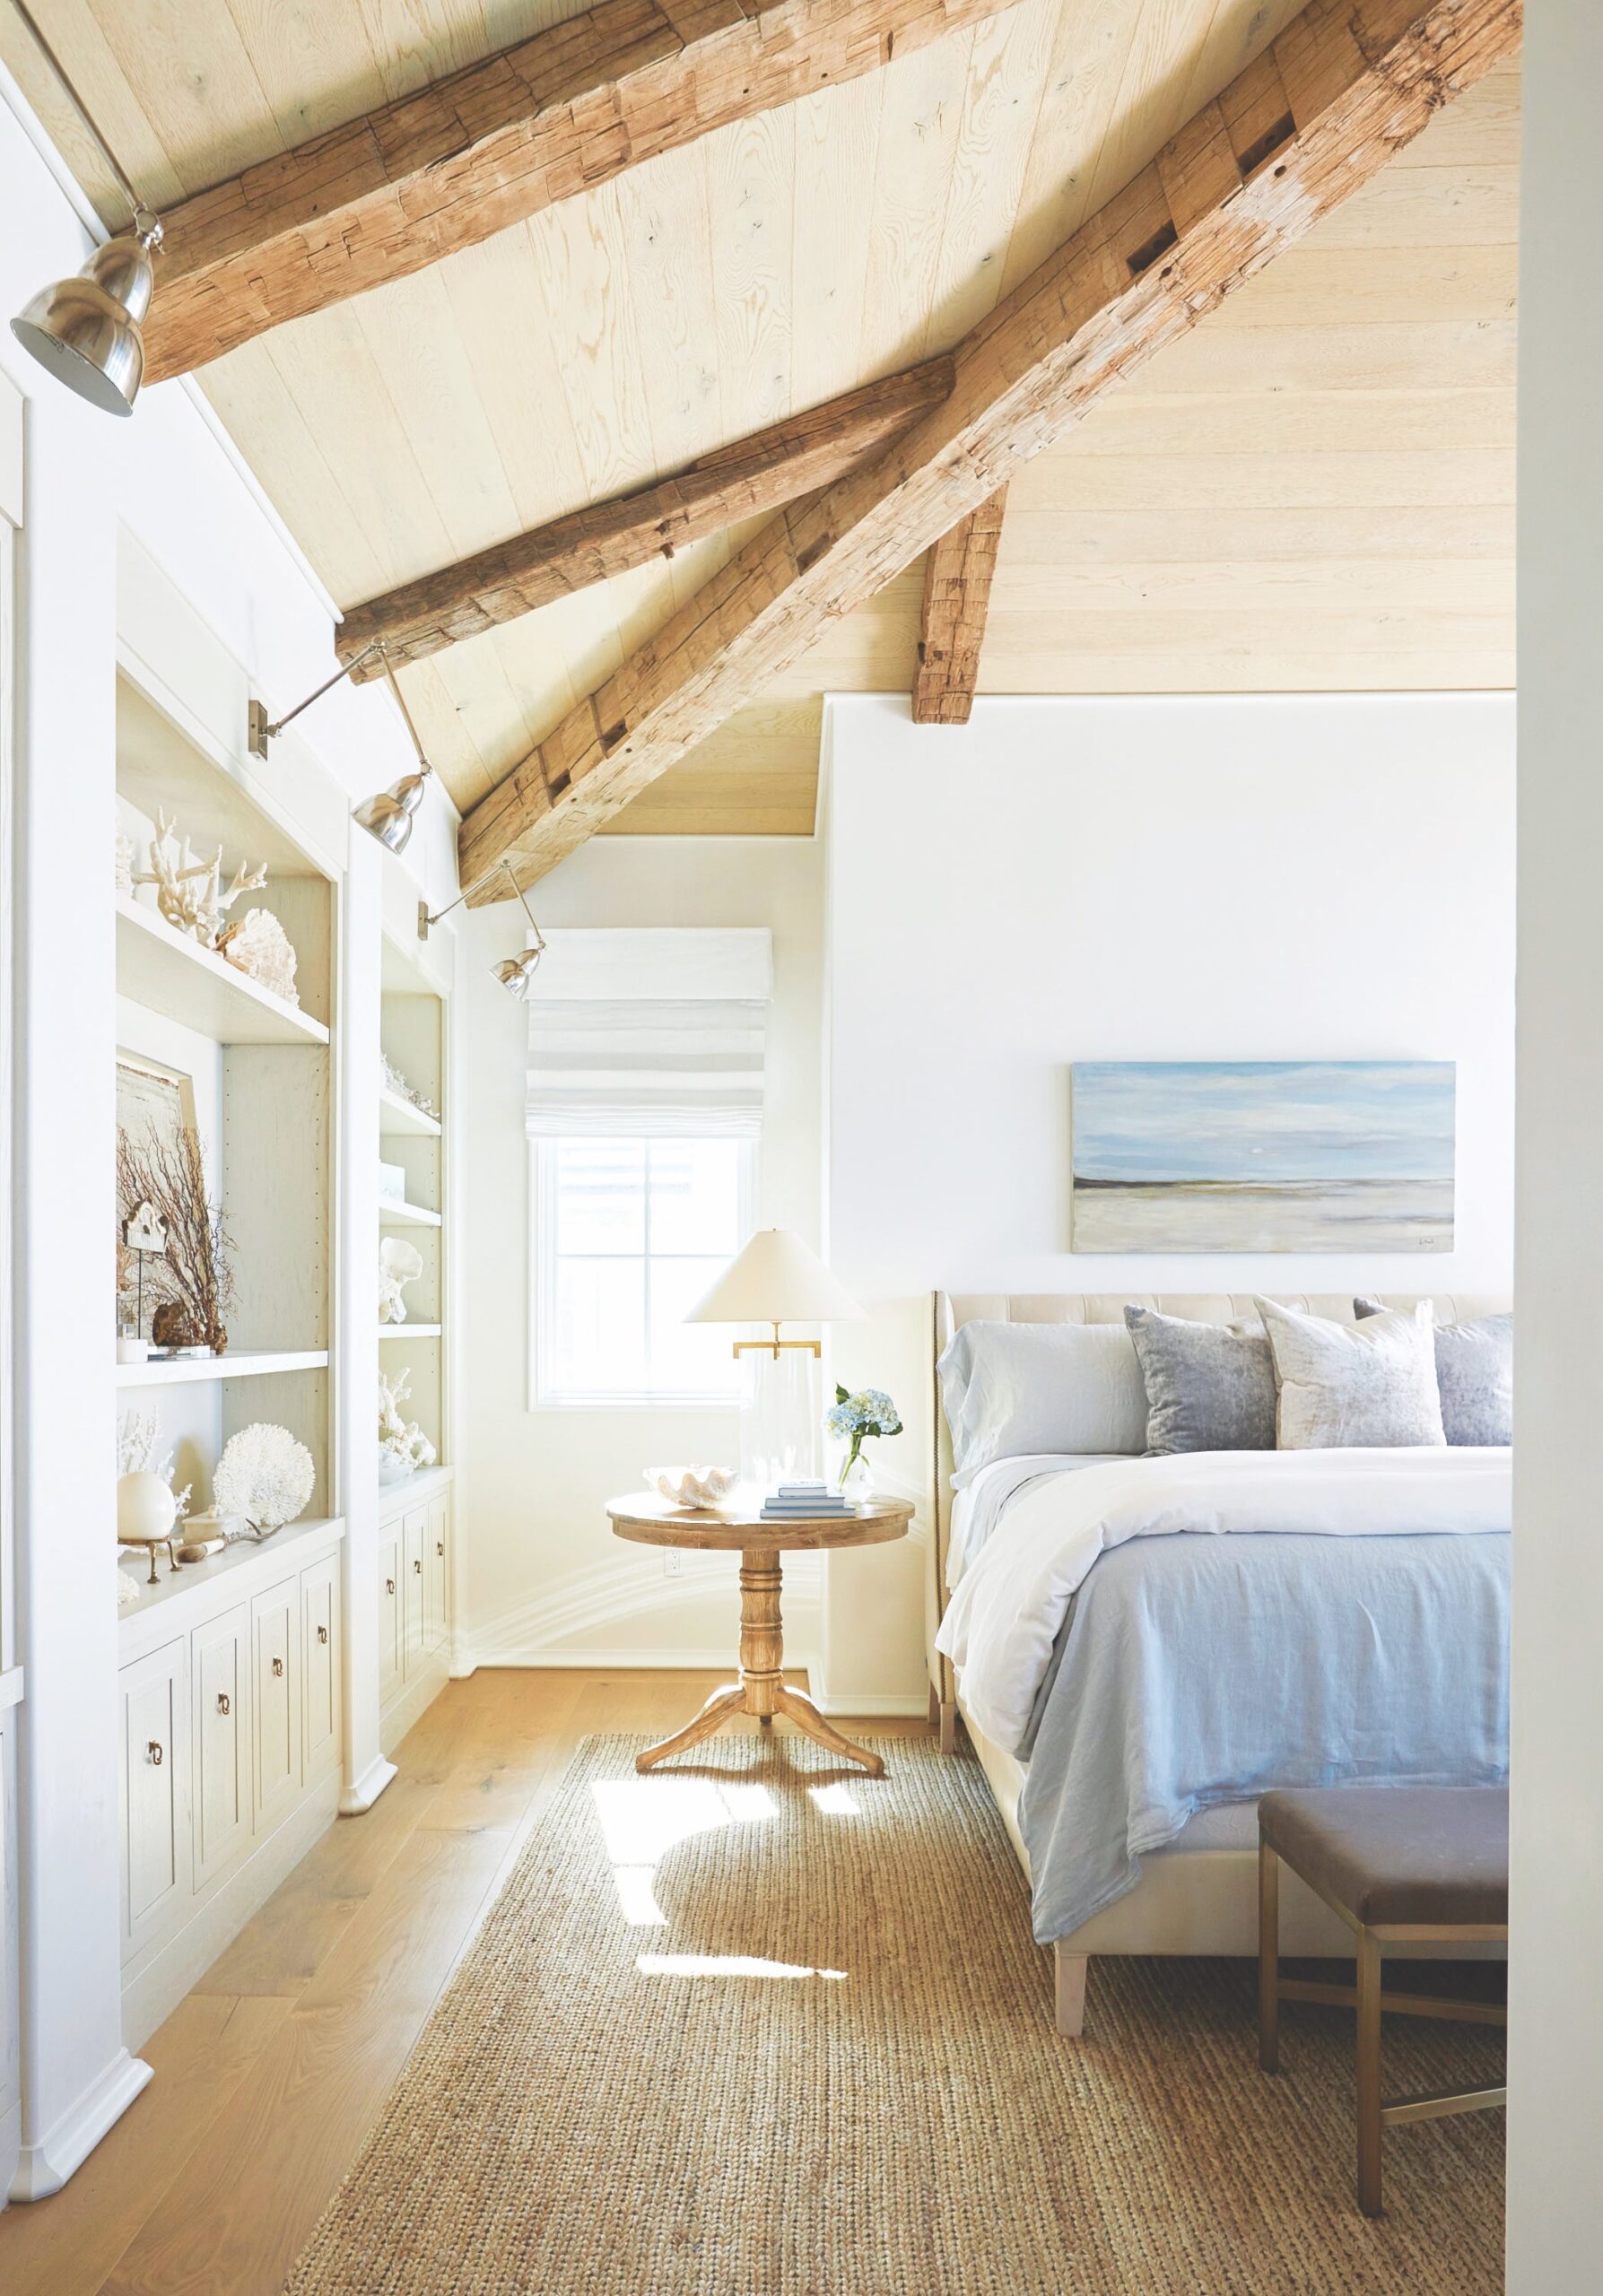 A serene bedroom oasis in The Retreat neighborhood of Blue Mountain Beach, Florida, designed by Holly Shipman